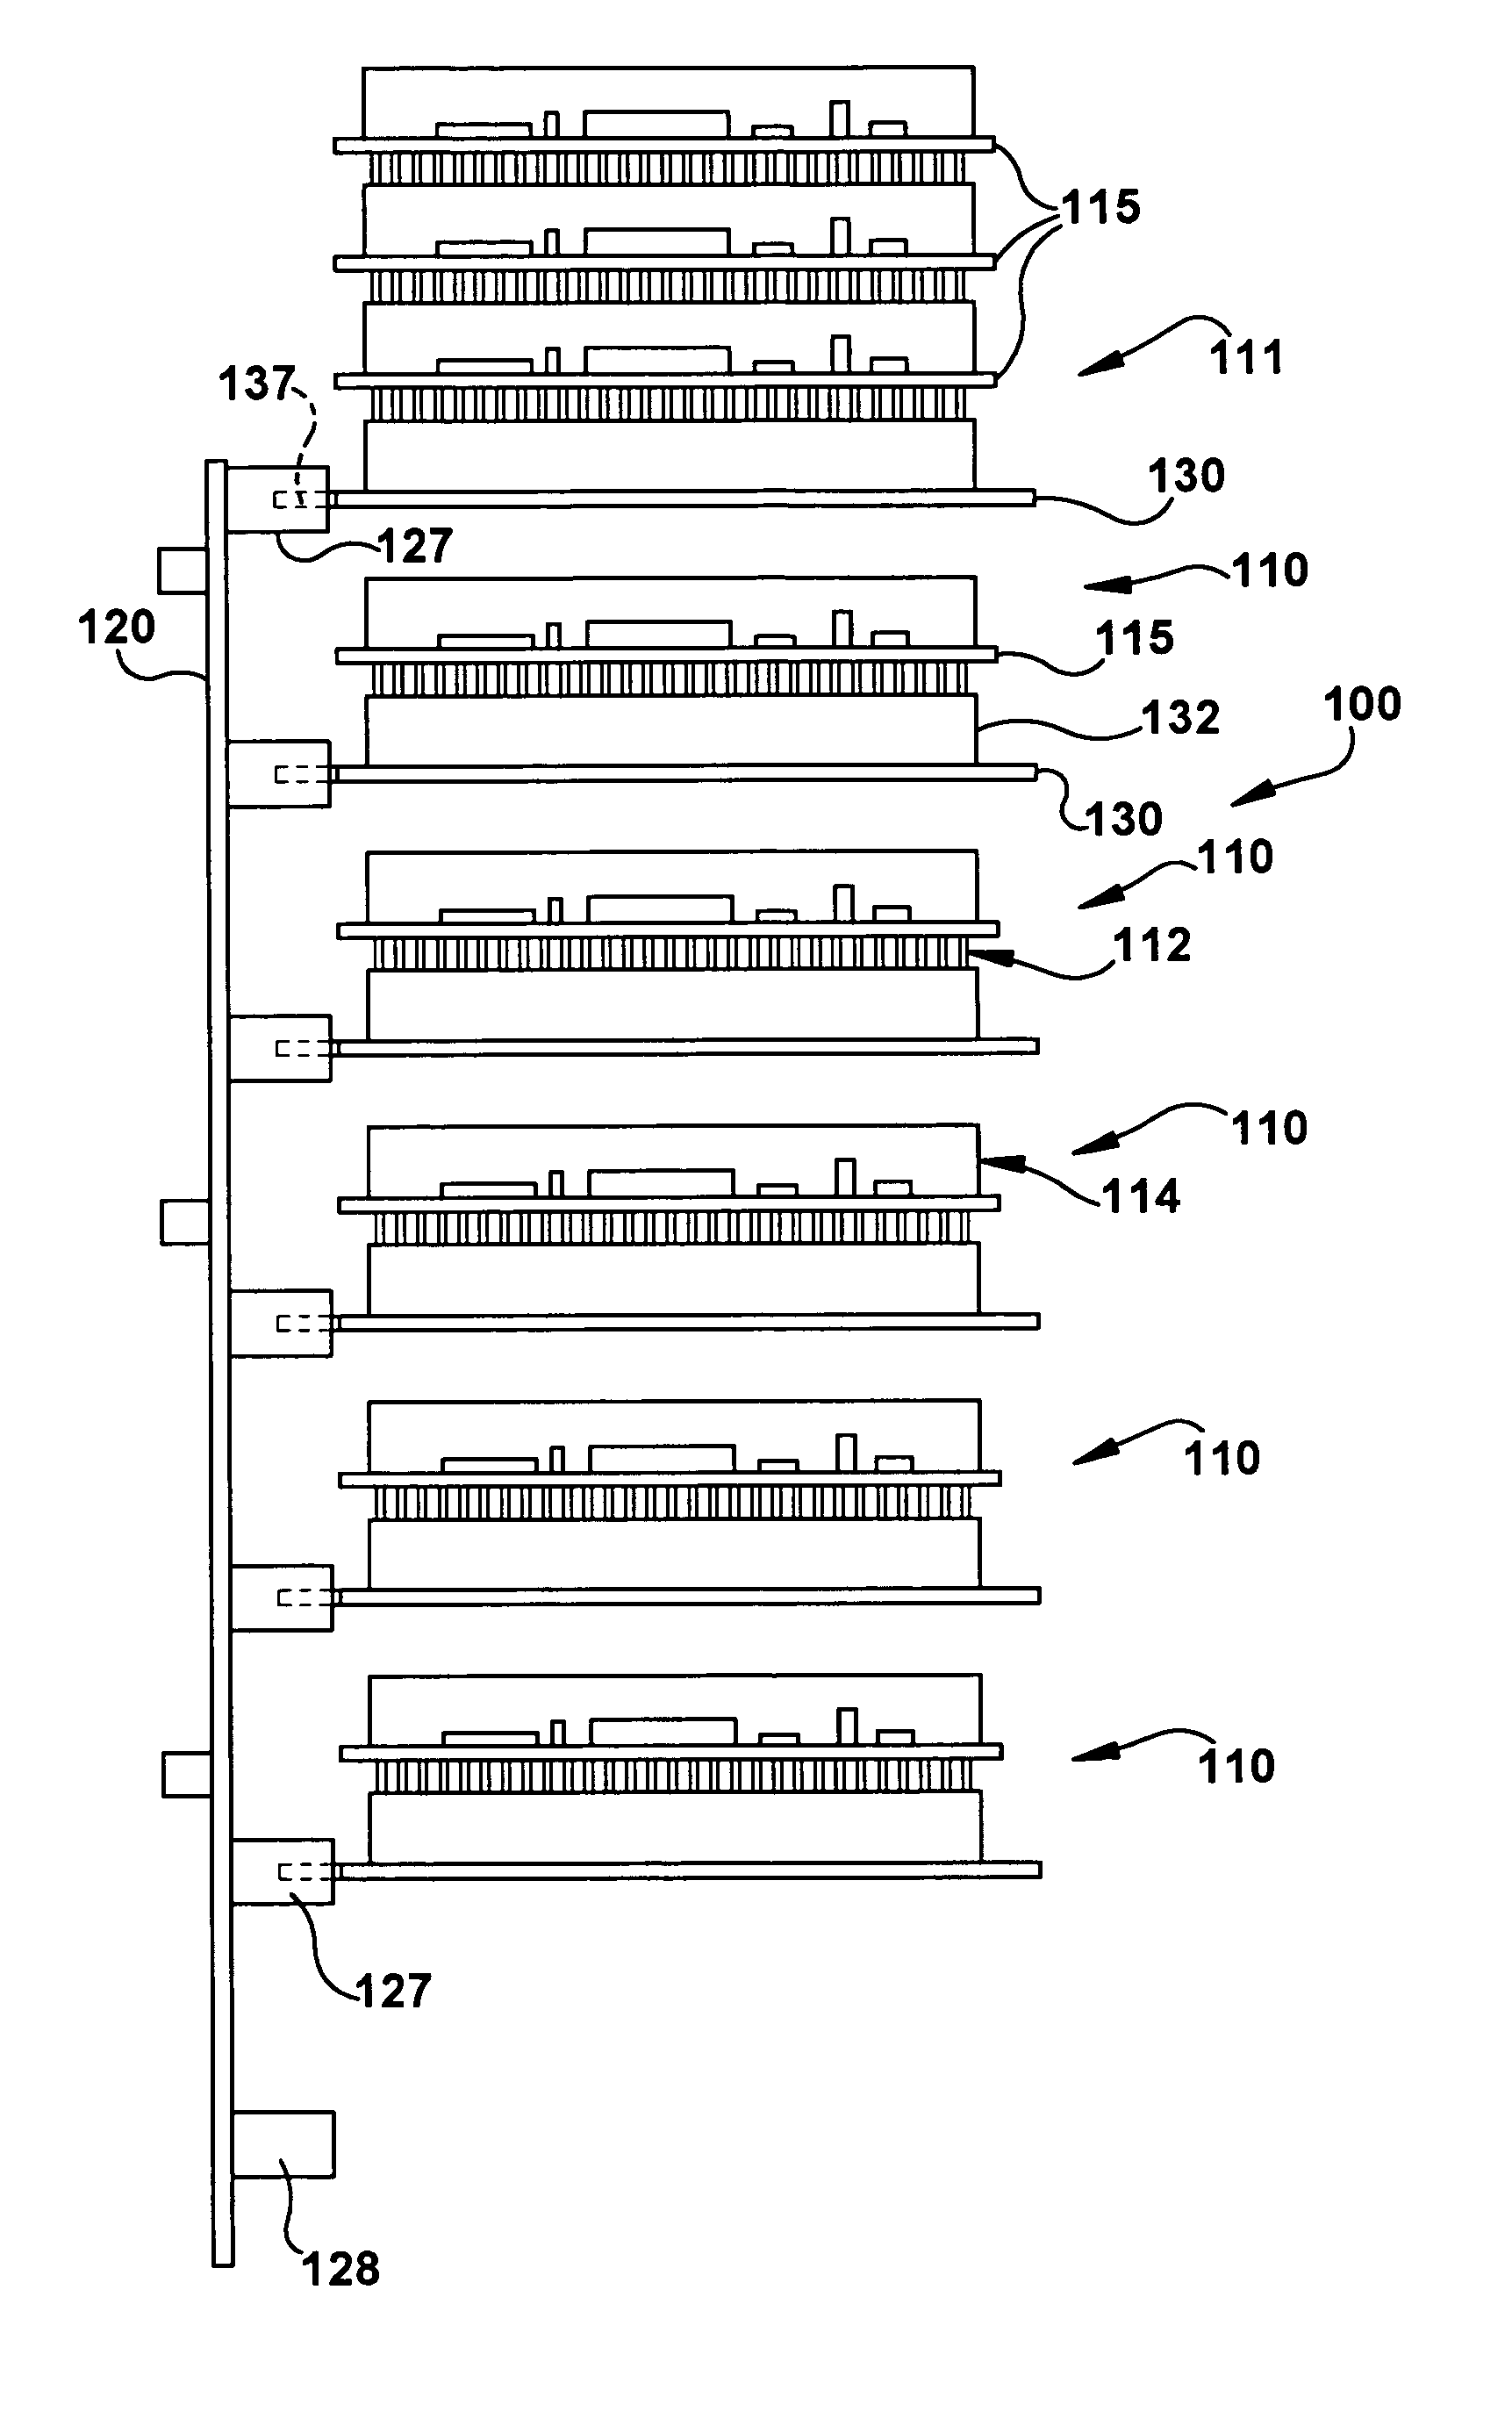 Systems for electrically connecting circuit board based electronic devices